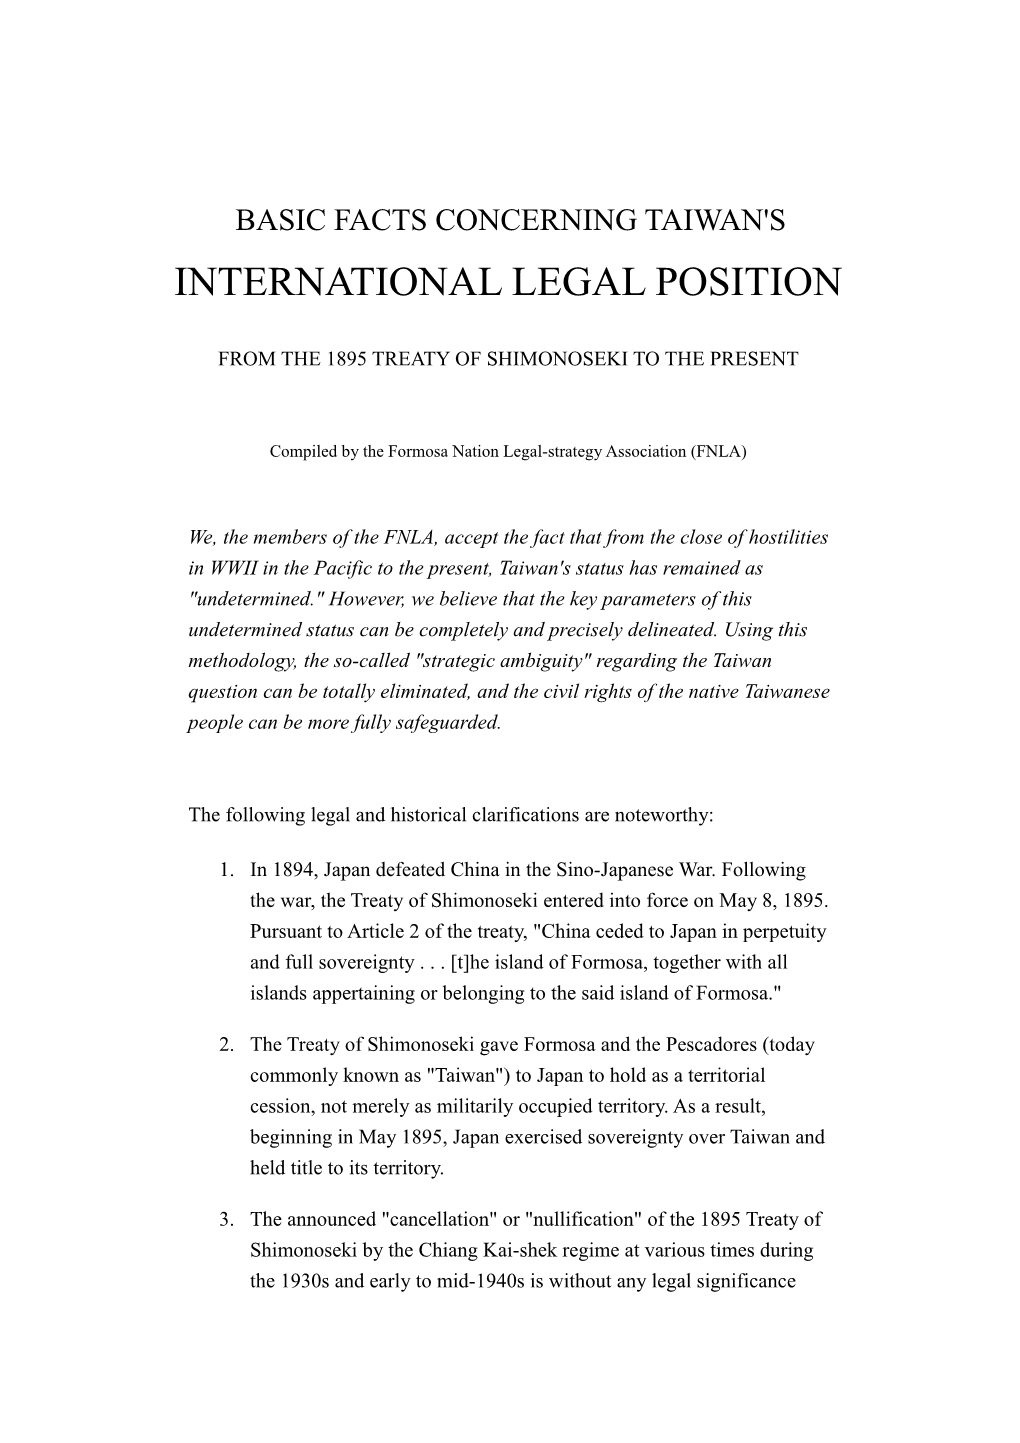 Basic Facts Concerning Taiwan's International Legal Position